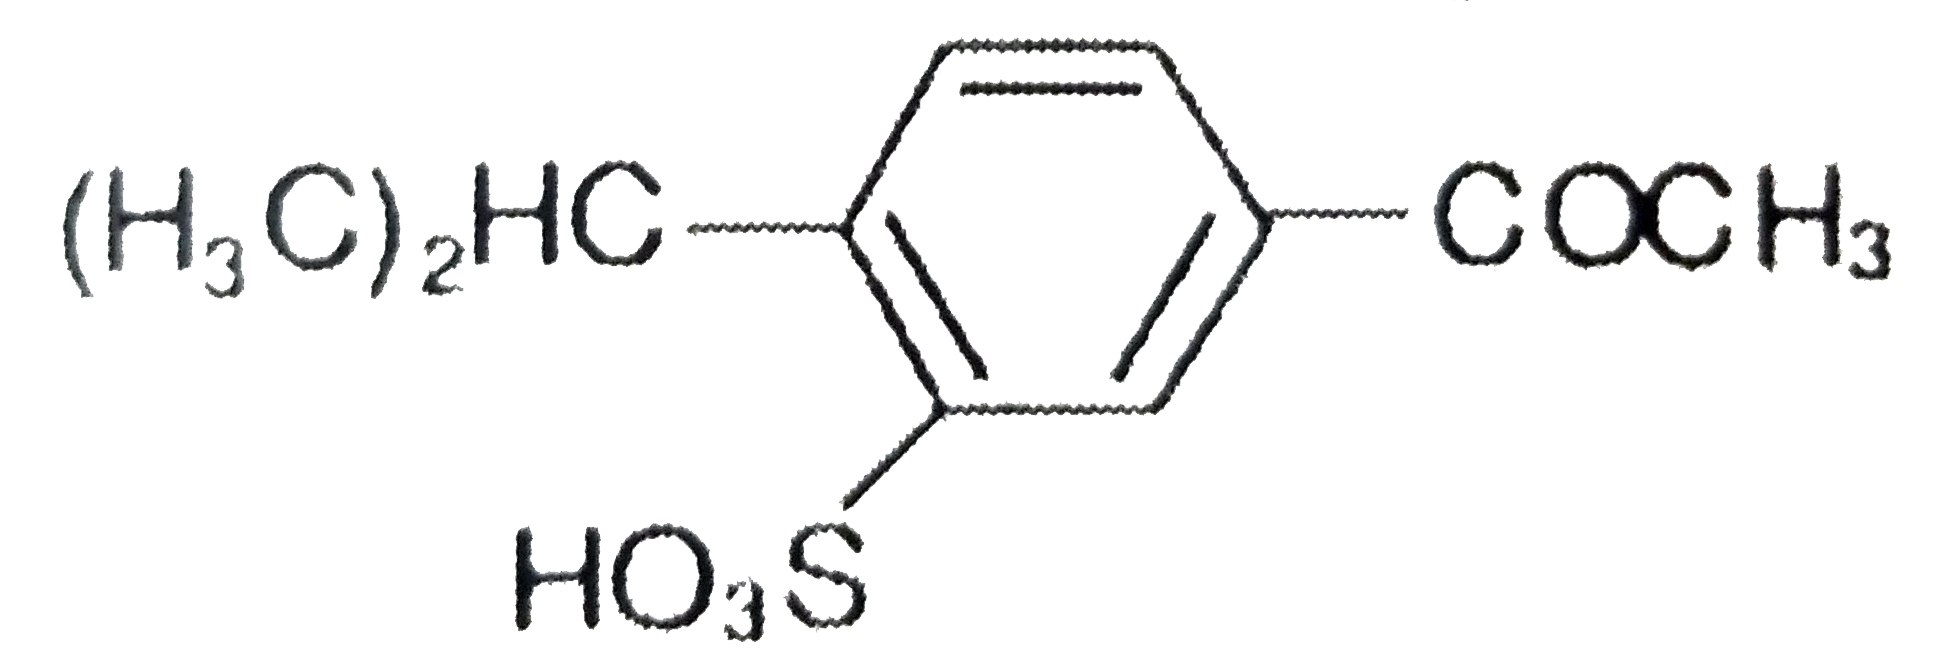 The best sequence of reactions for preparation of the following compound from benzene is